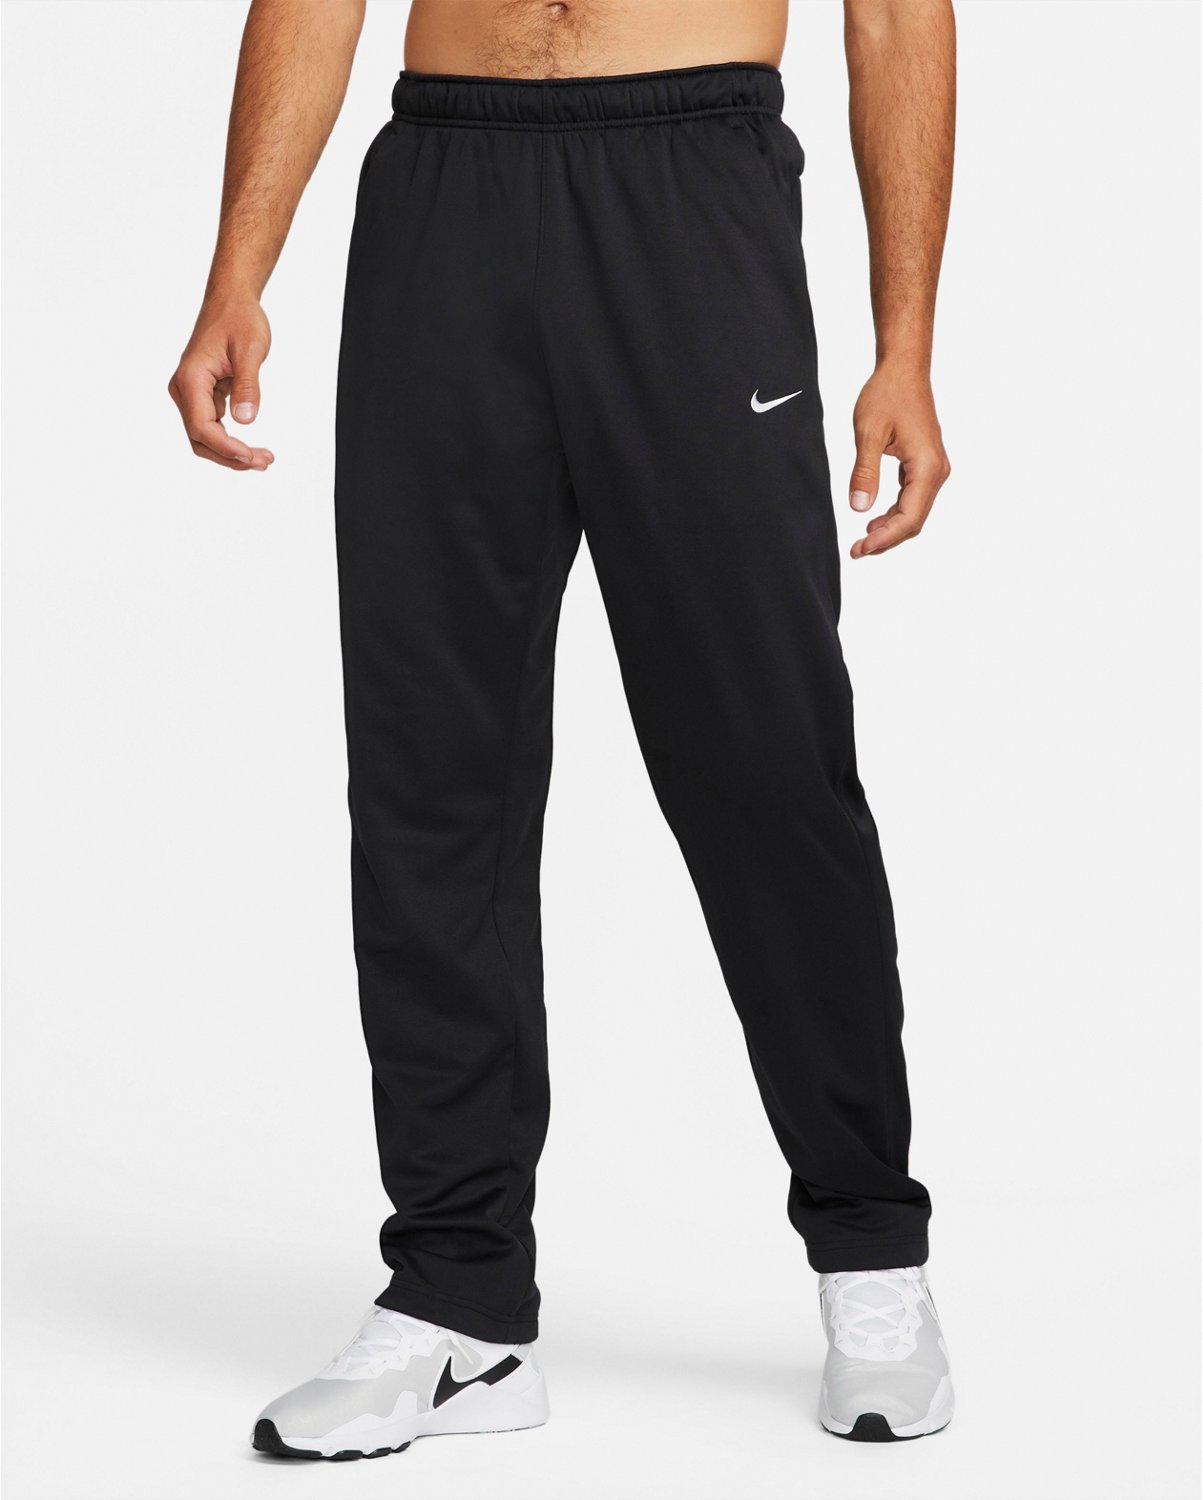 NIKE Nike DRI-FIT ACADEMY - Jogging Homme navy/red - Private Sport